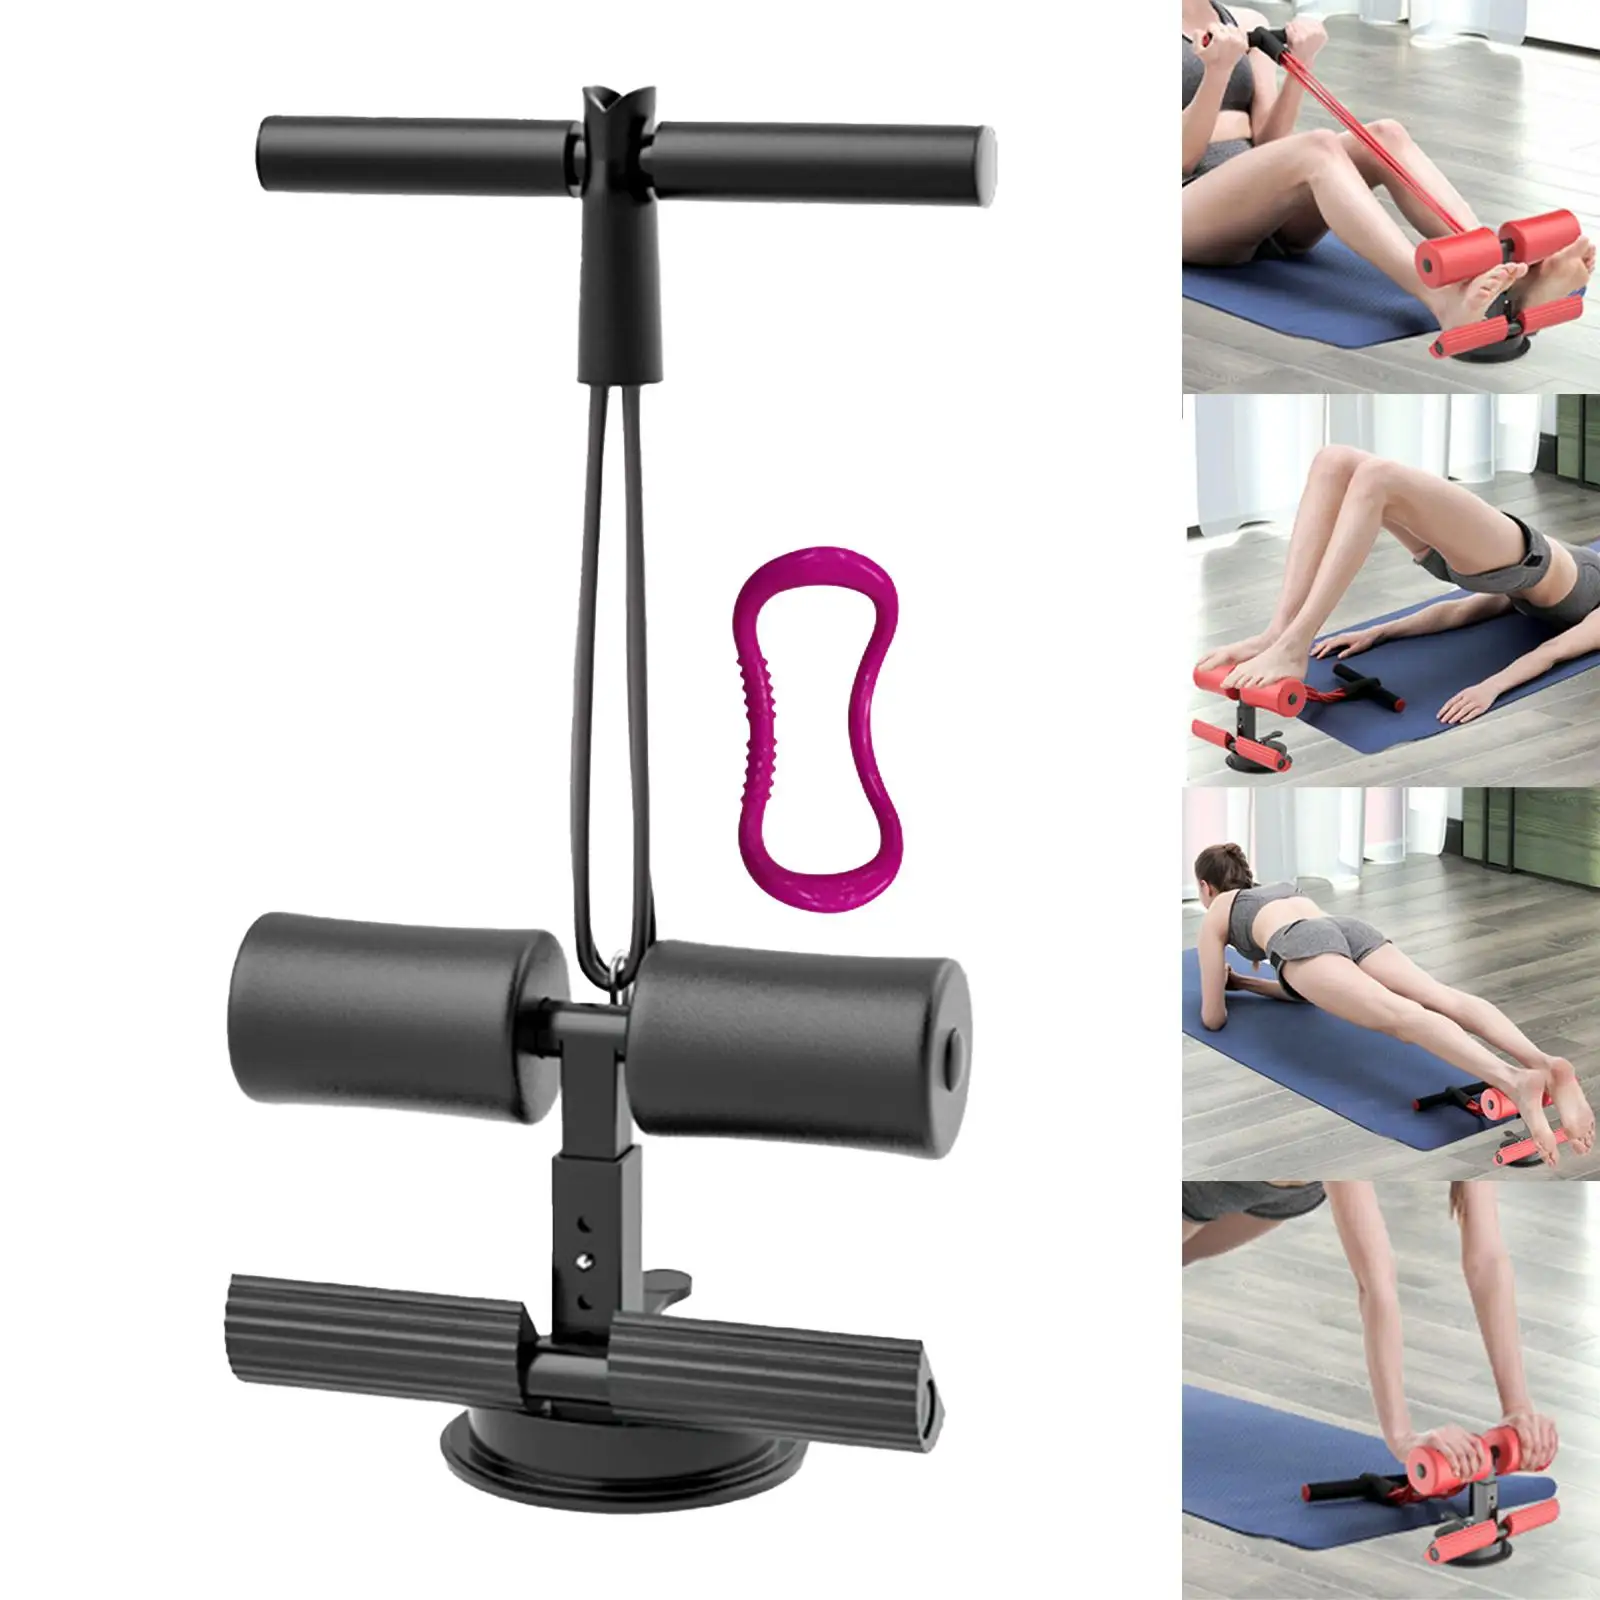 Ankle Support Attachment Machine Adjustable Abdominal Equipment Device Portable Sit up Rack for Fitness Workout Sports Travel